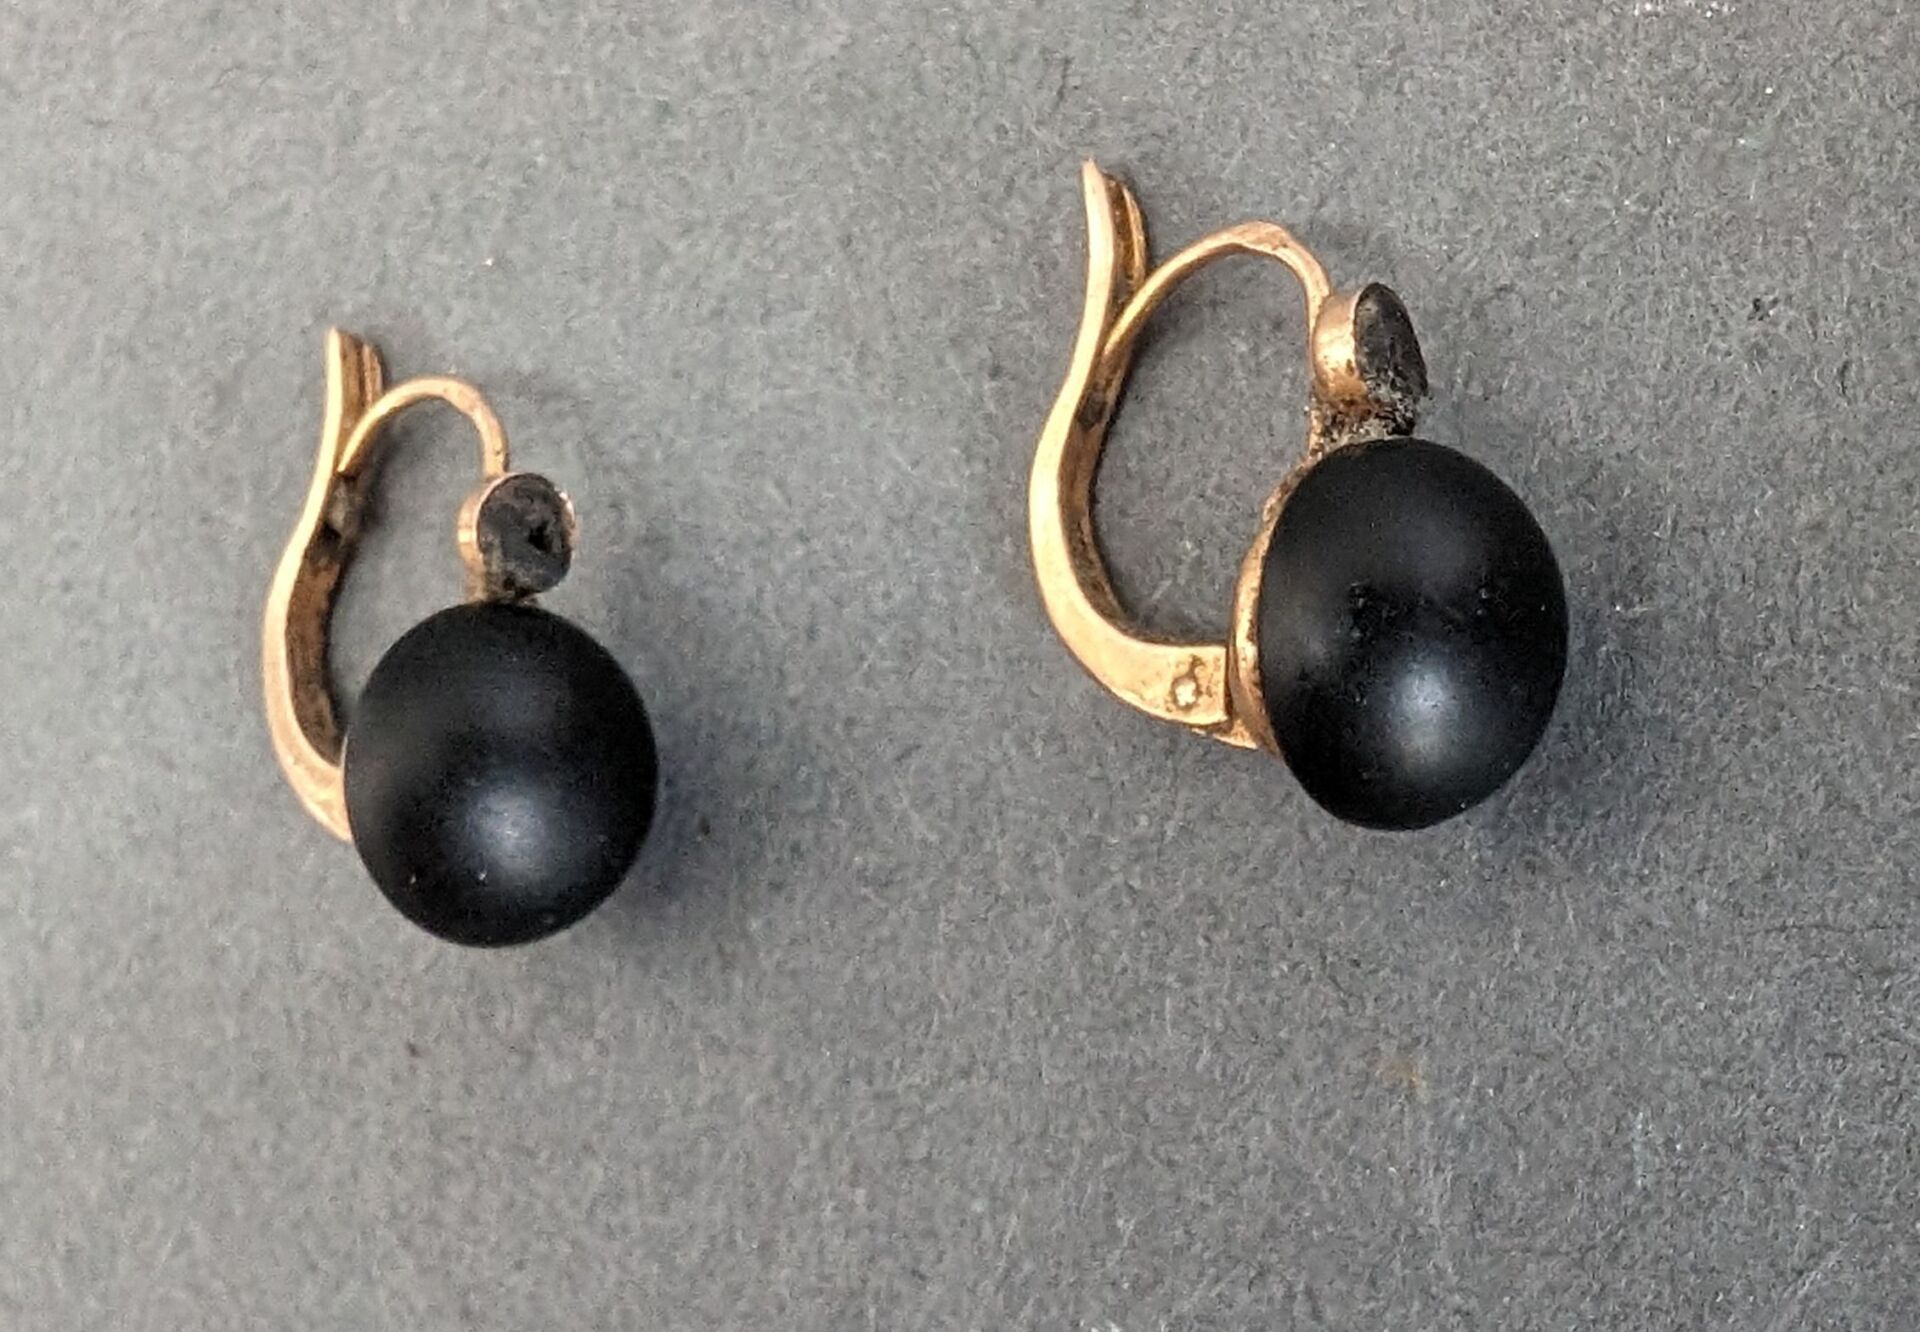 Null Pair of gold and black stone earrings
Gross weight: 1.78 g